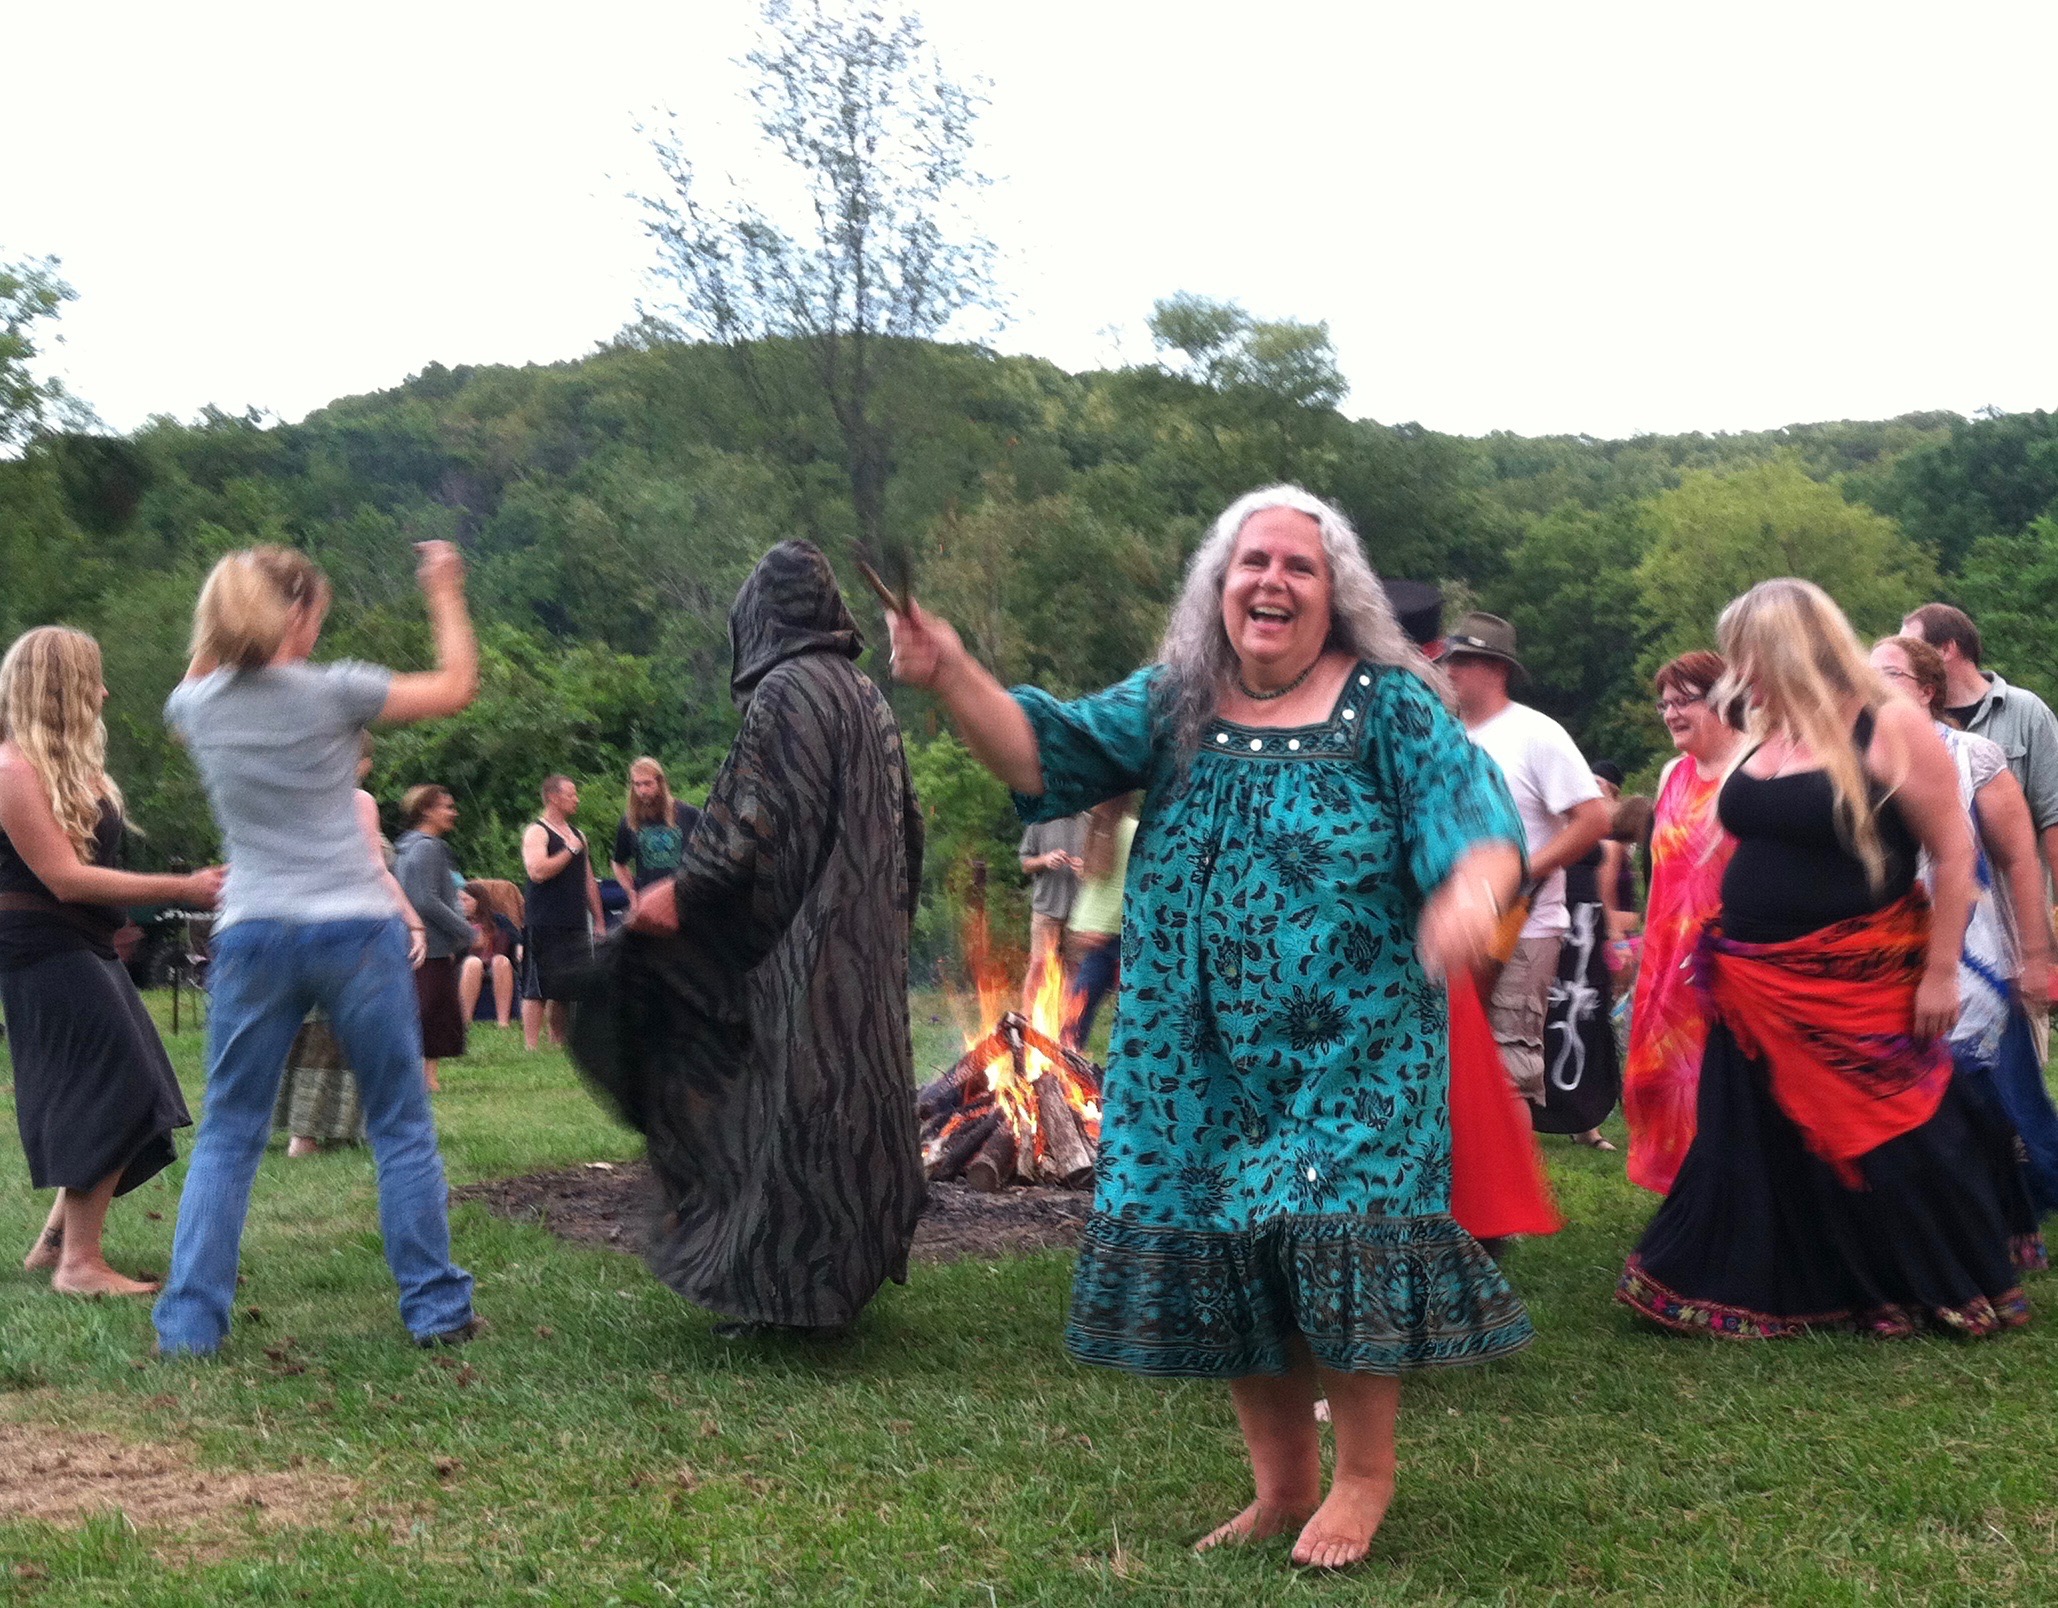 Pagan church in Wisconsin honors summer solstice at 8-day nature festival